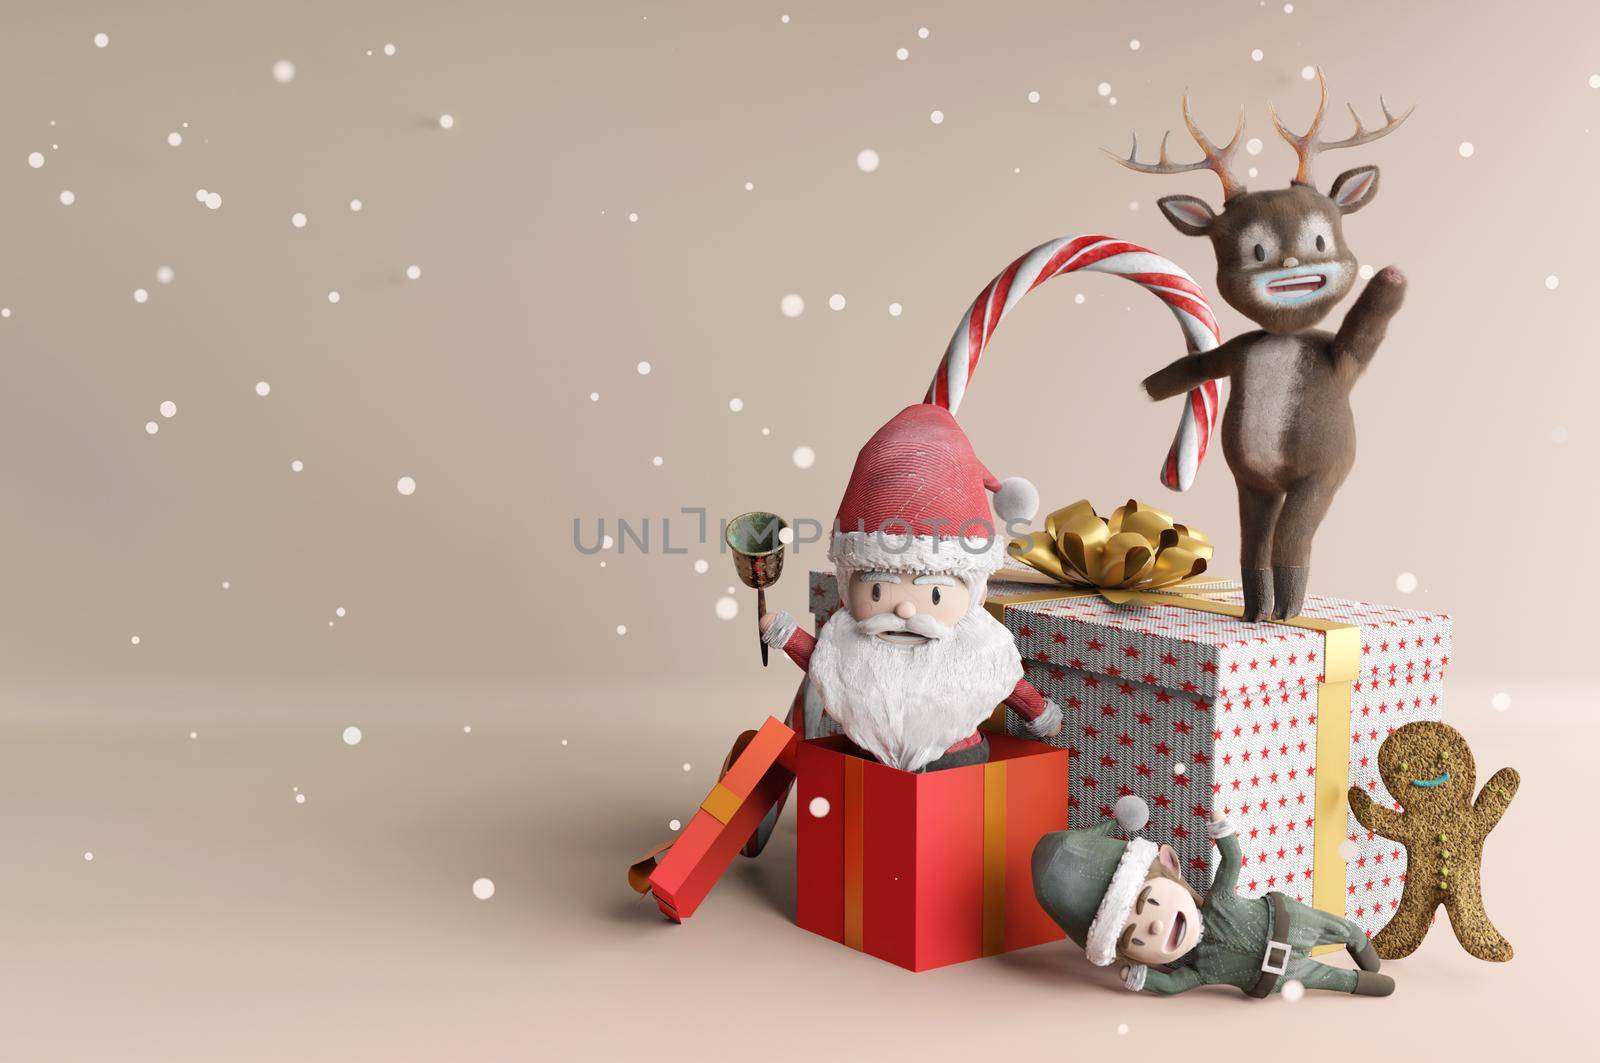 3d illustration. Gift box full with Santa Claus inside. Concept Merry christmas and Happy New Year.